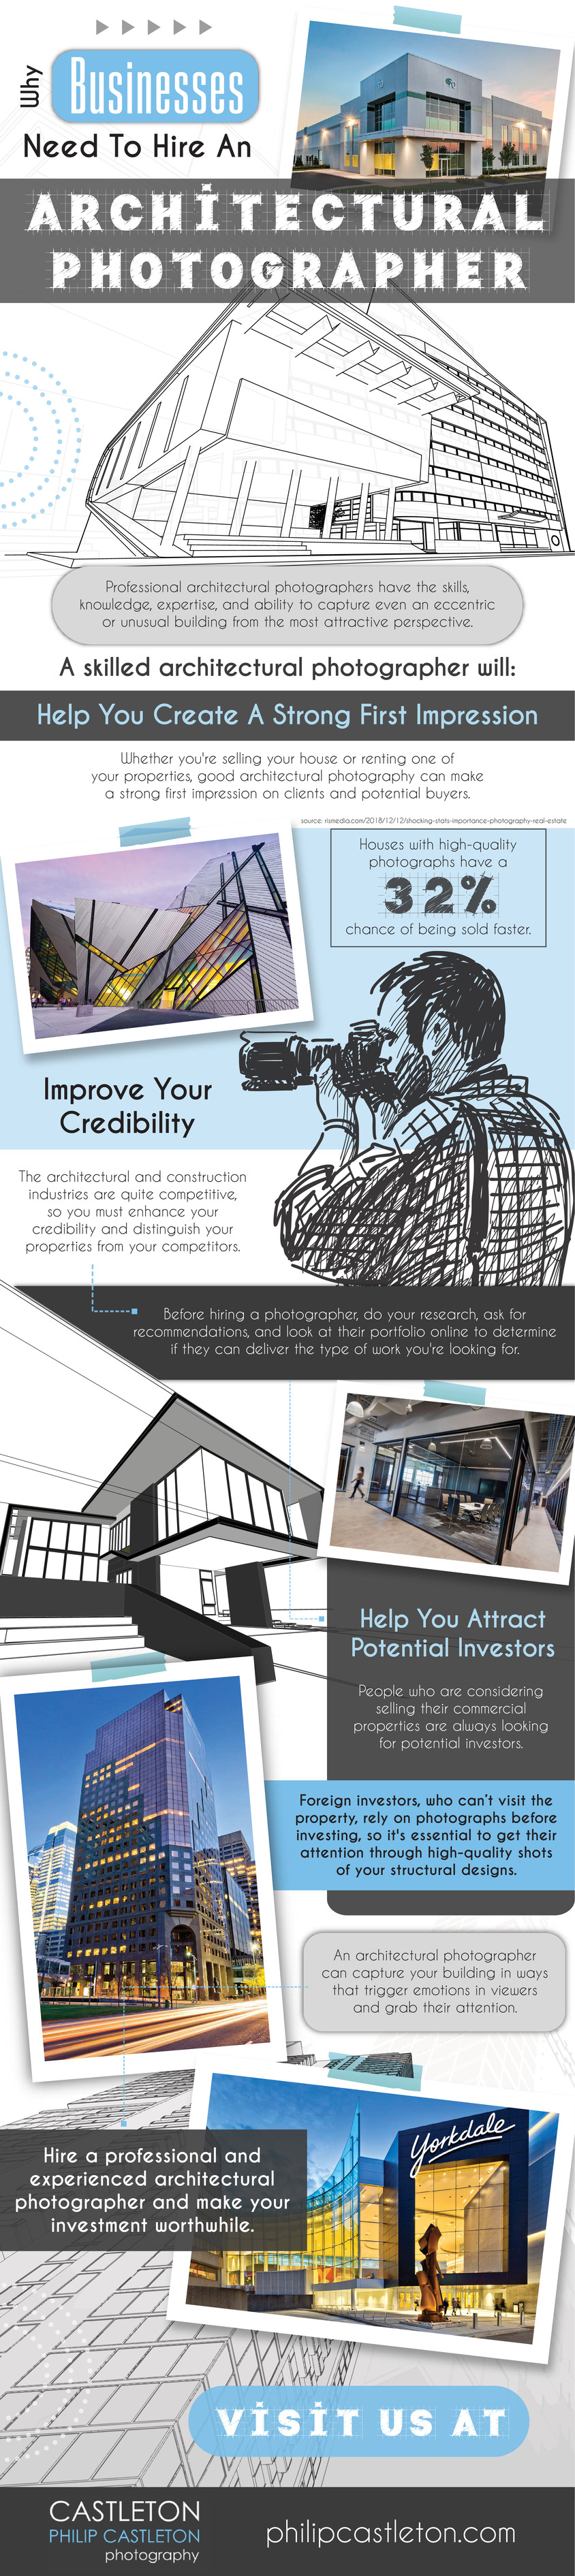 Why Businesses Need To Hire An Architectural Photographer